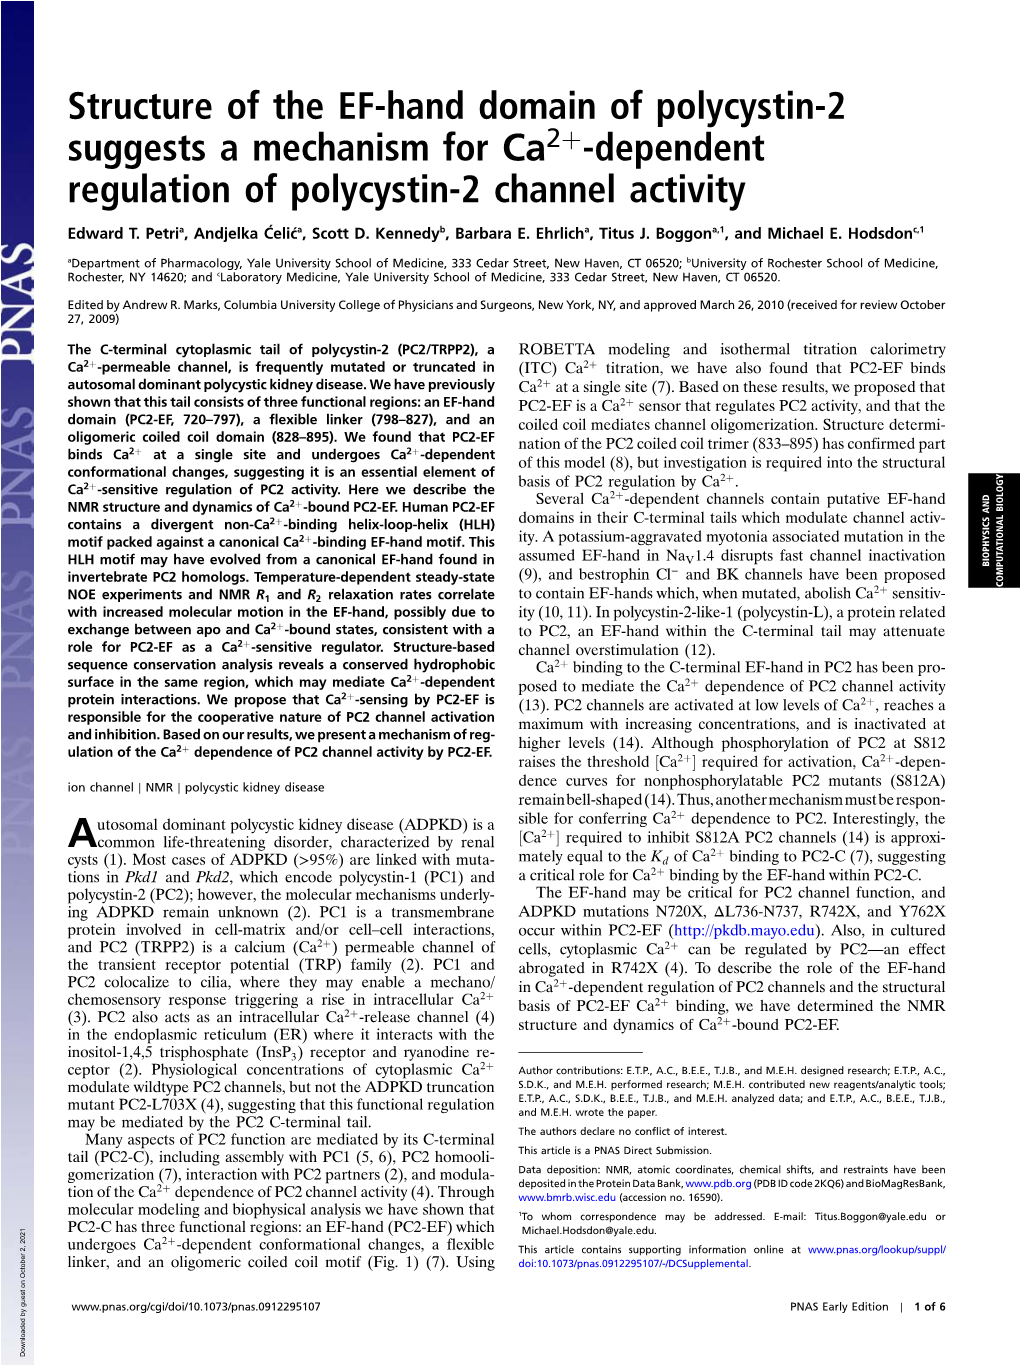 Structure of the EF-Hand Domain of Polycystin-2 Suggests a Mechanism for Ca2þ-Dependent Regulation of Polycystin-2 Channel Activity